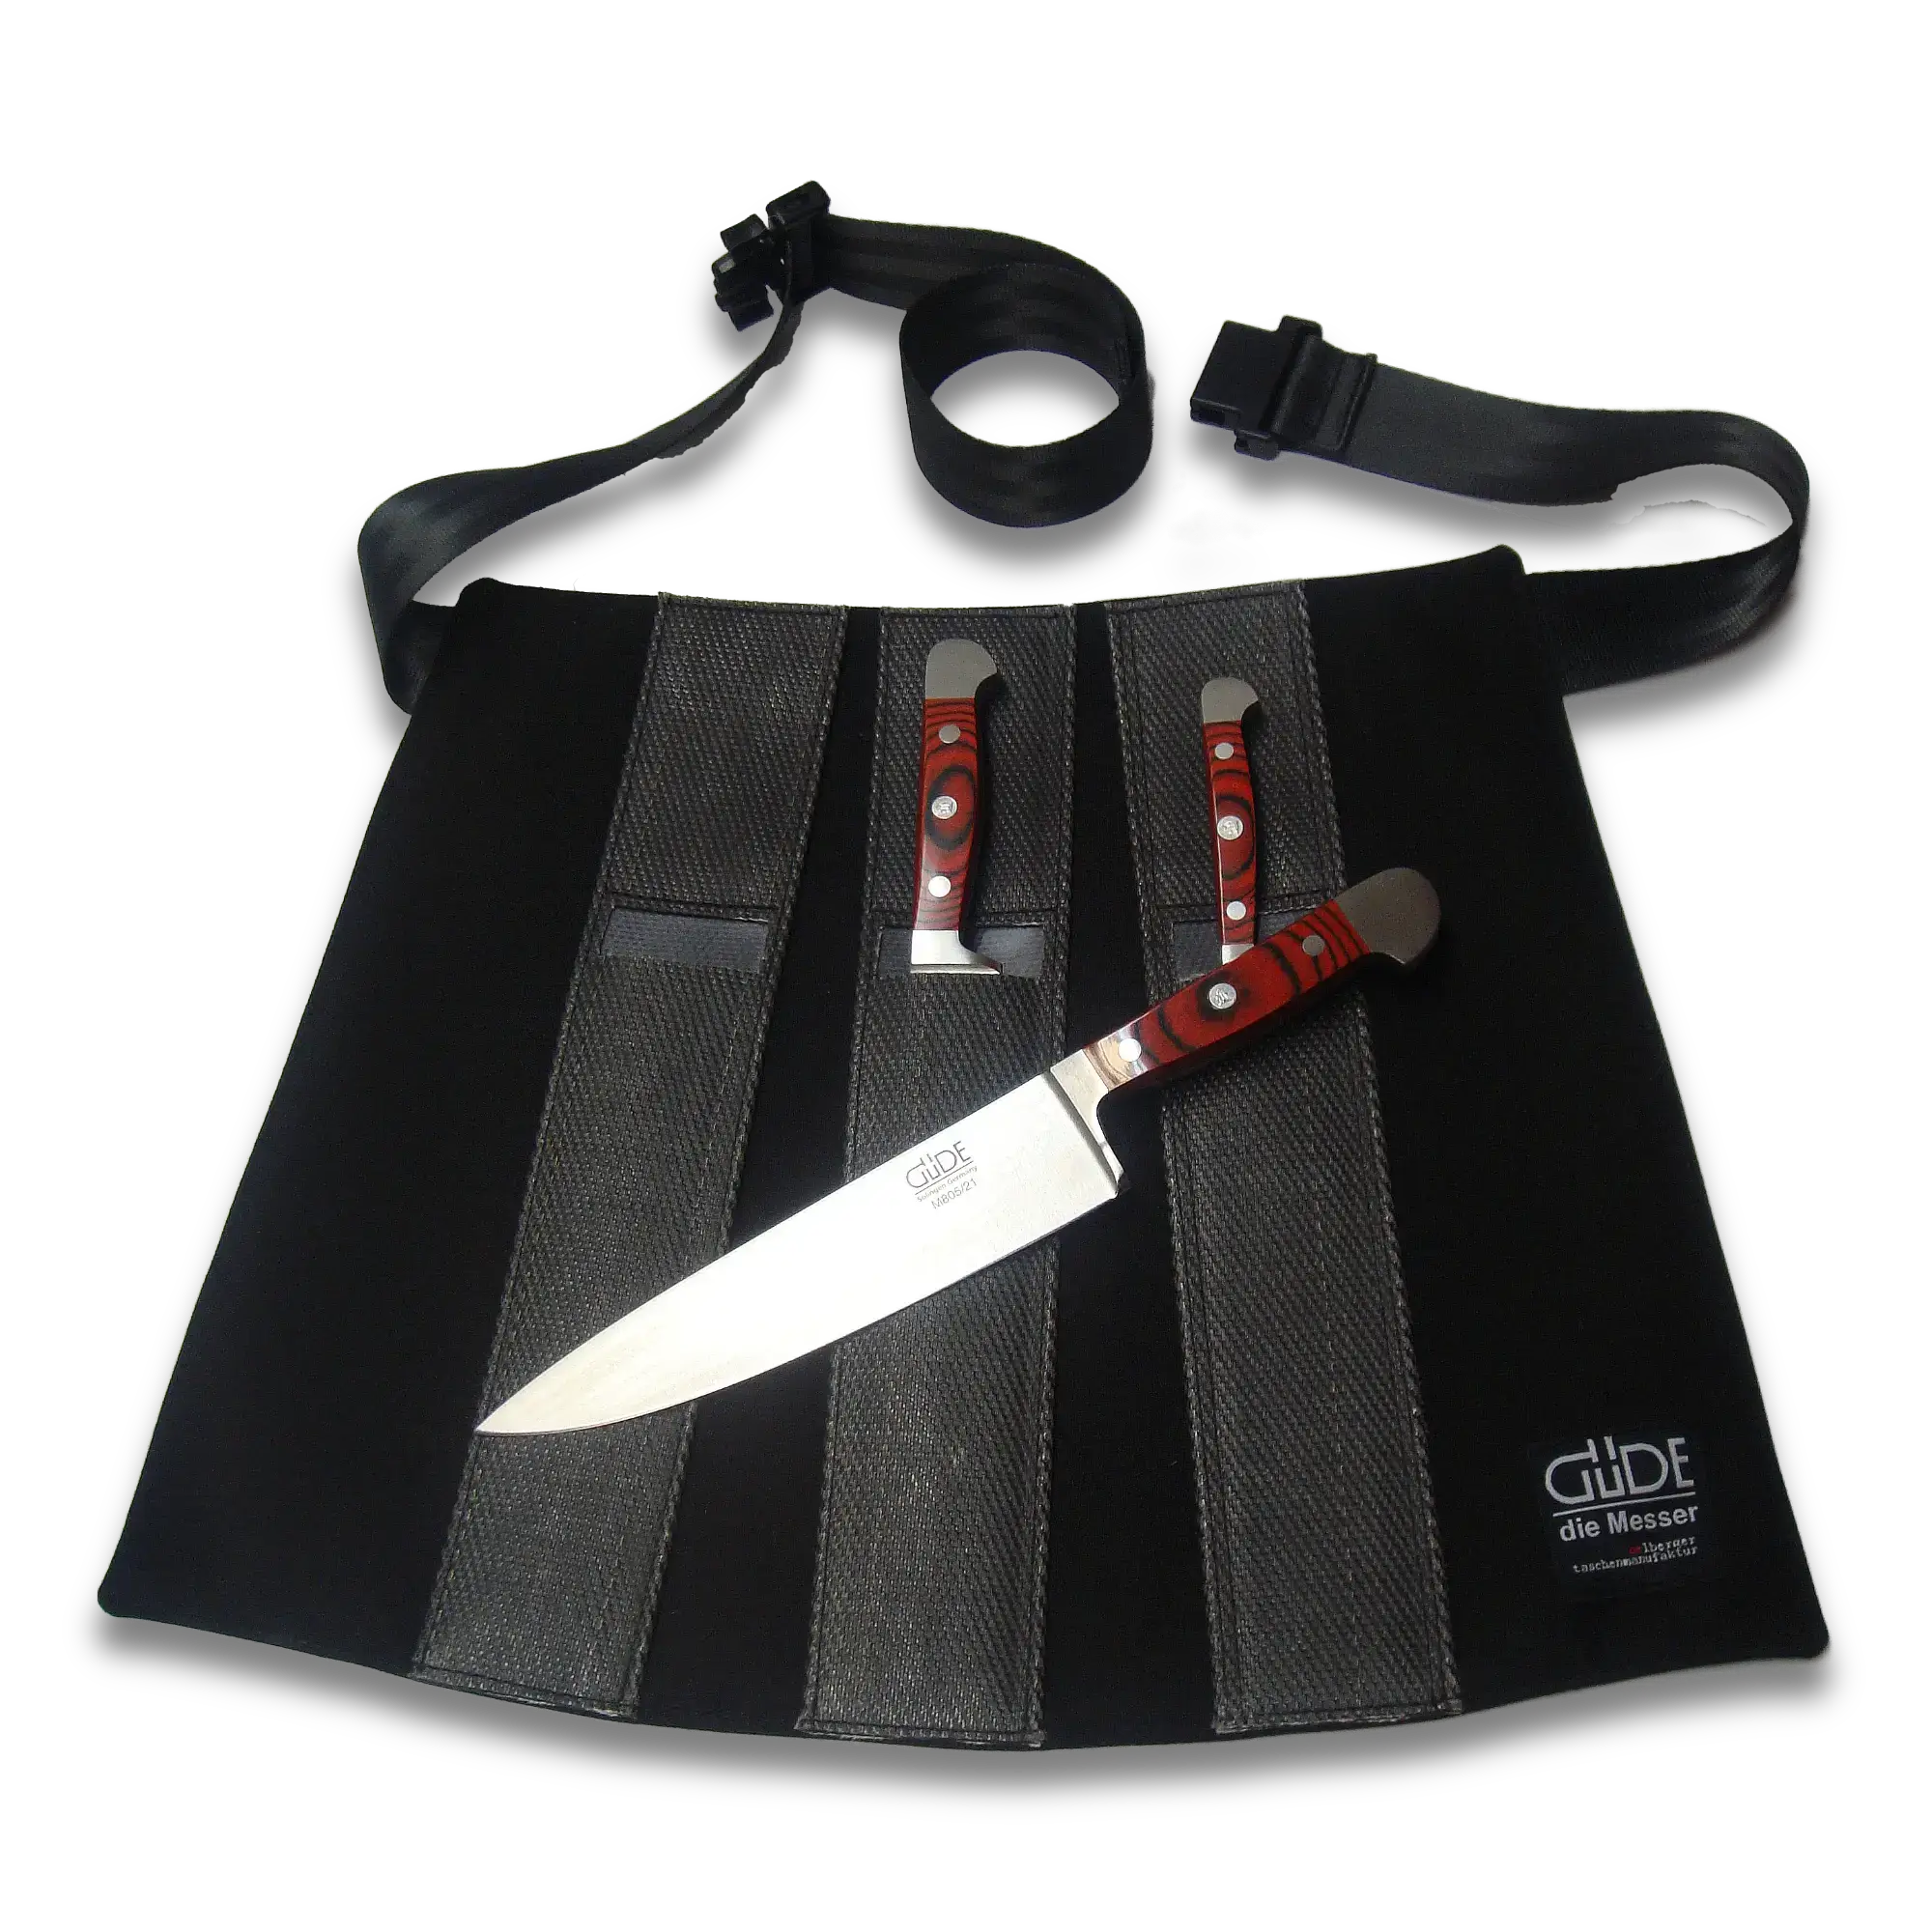 Knife Apron - can hold 3 knives (knife not included)